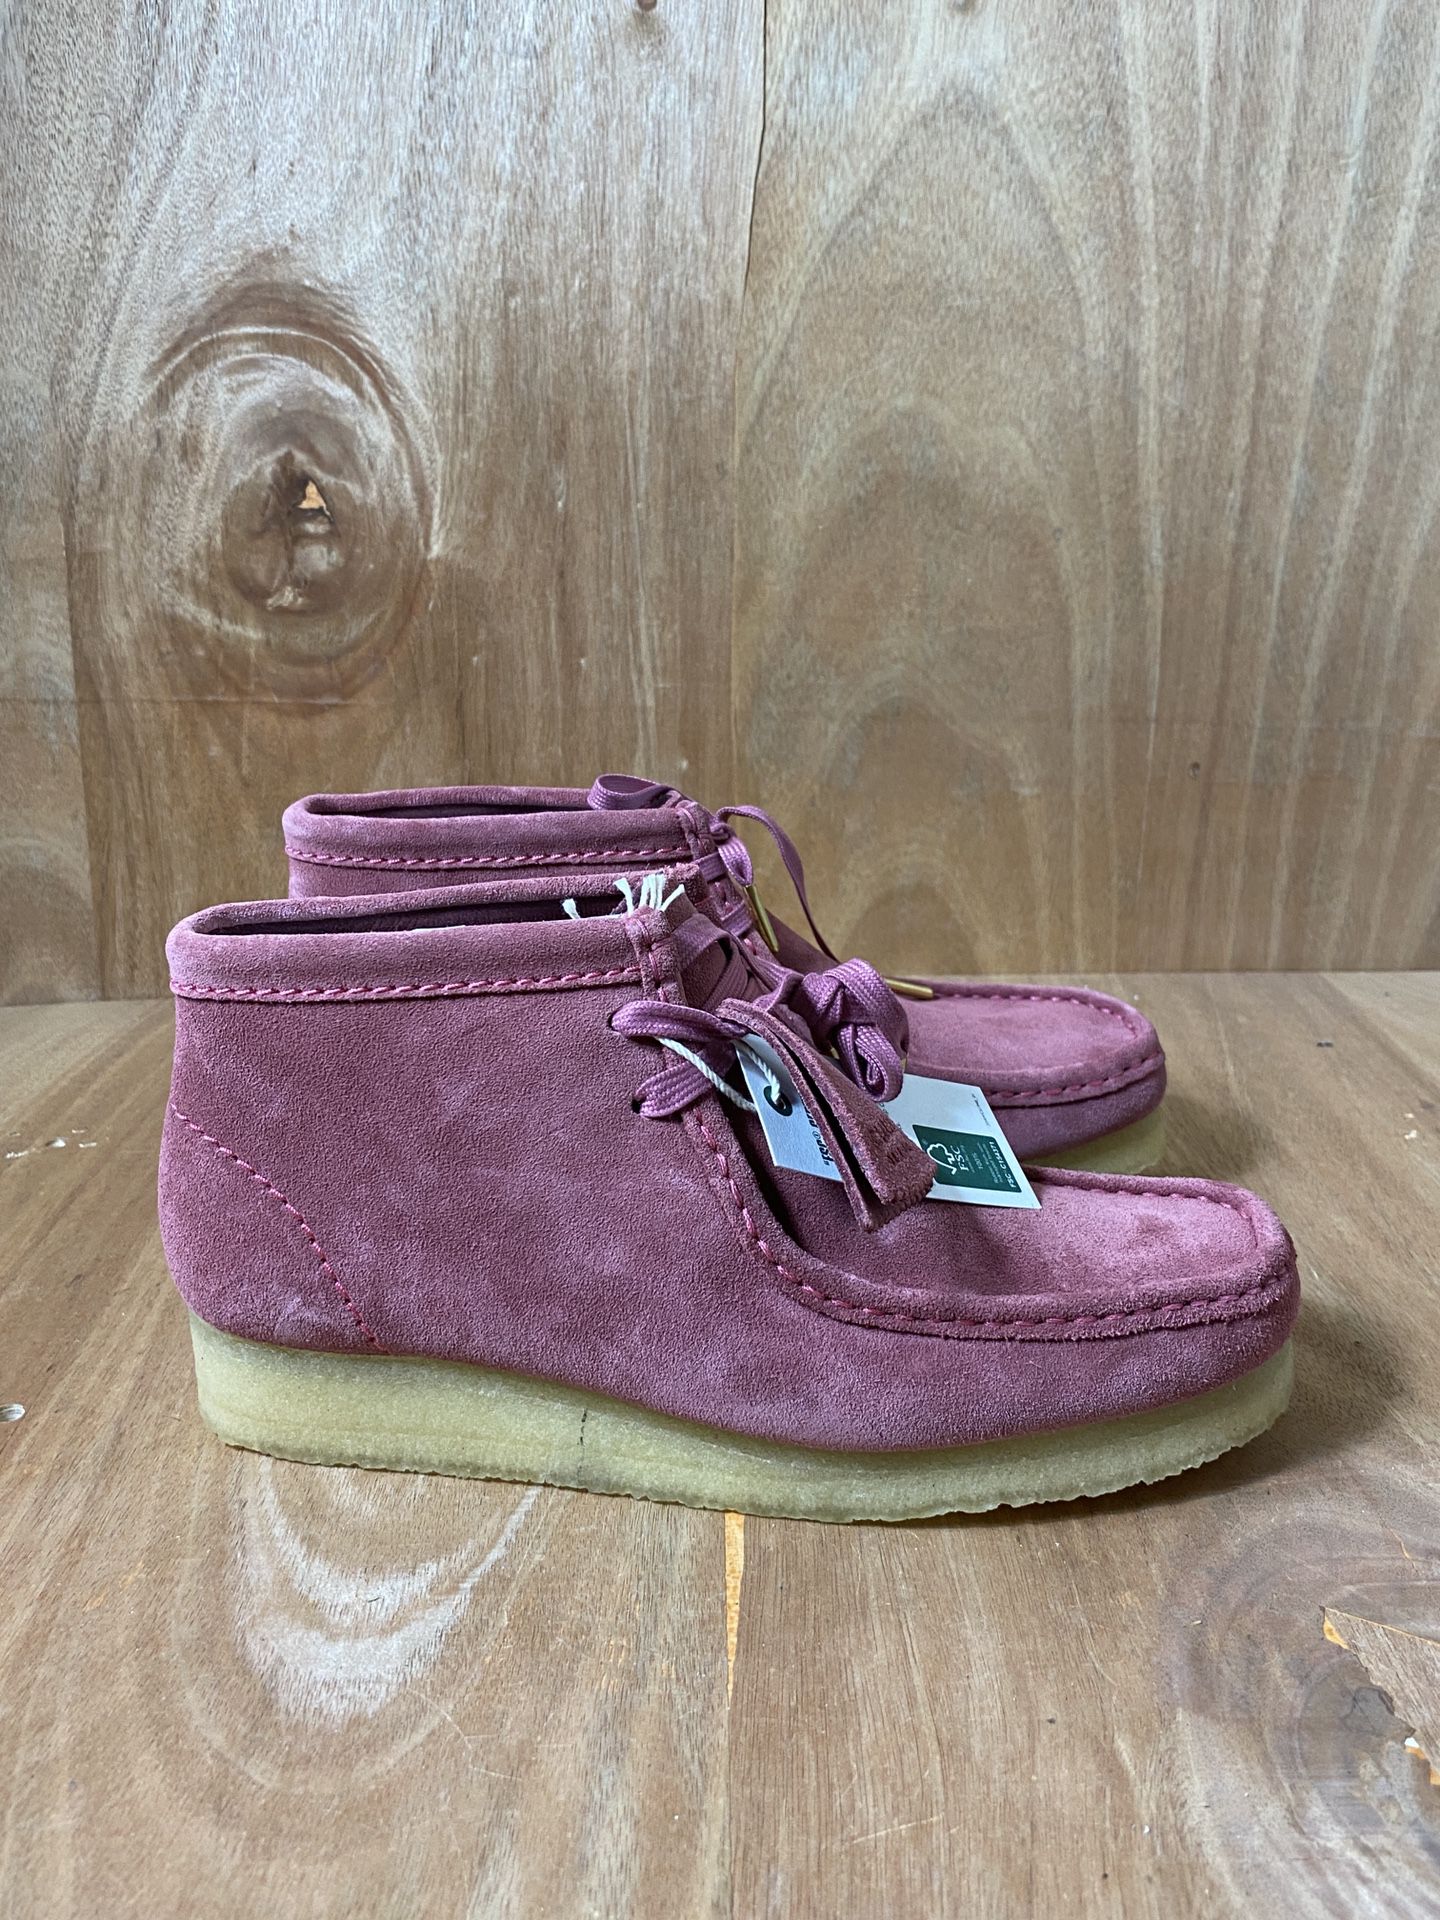 Clarks Wallabee  Boots Size 9 Womens 